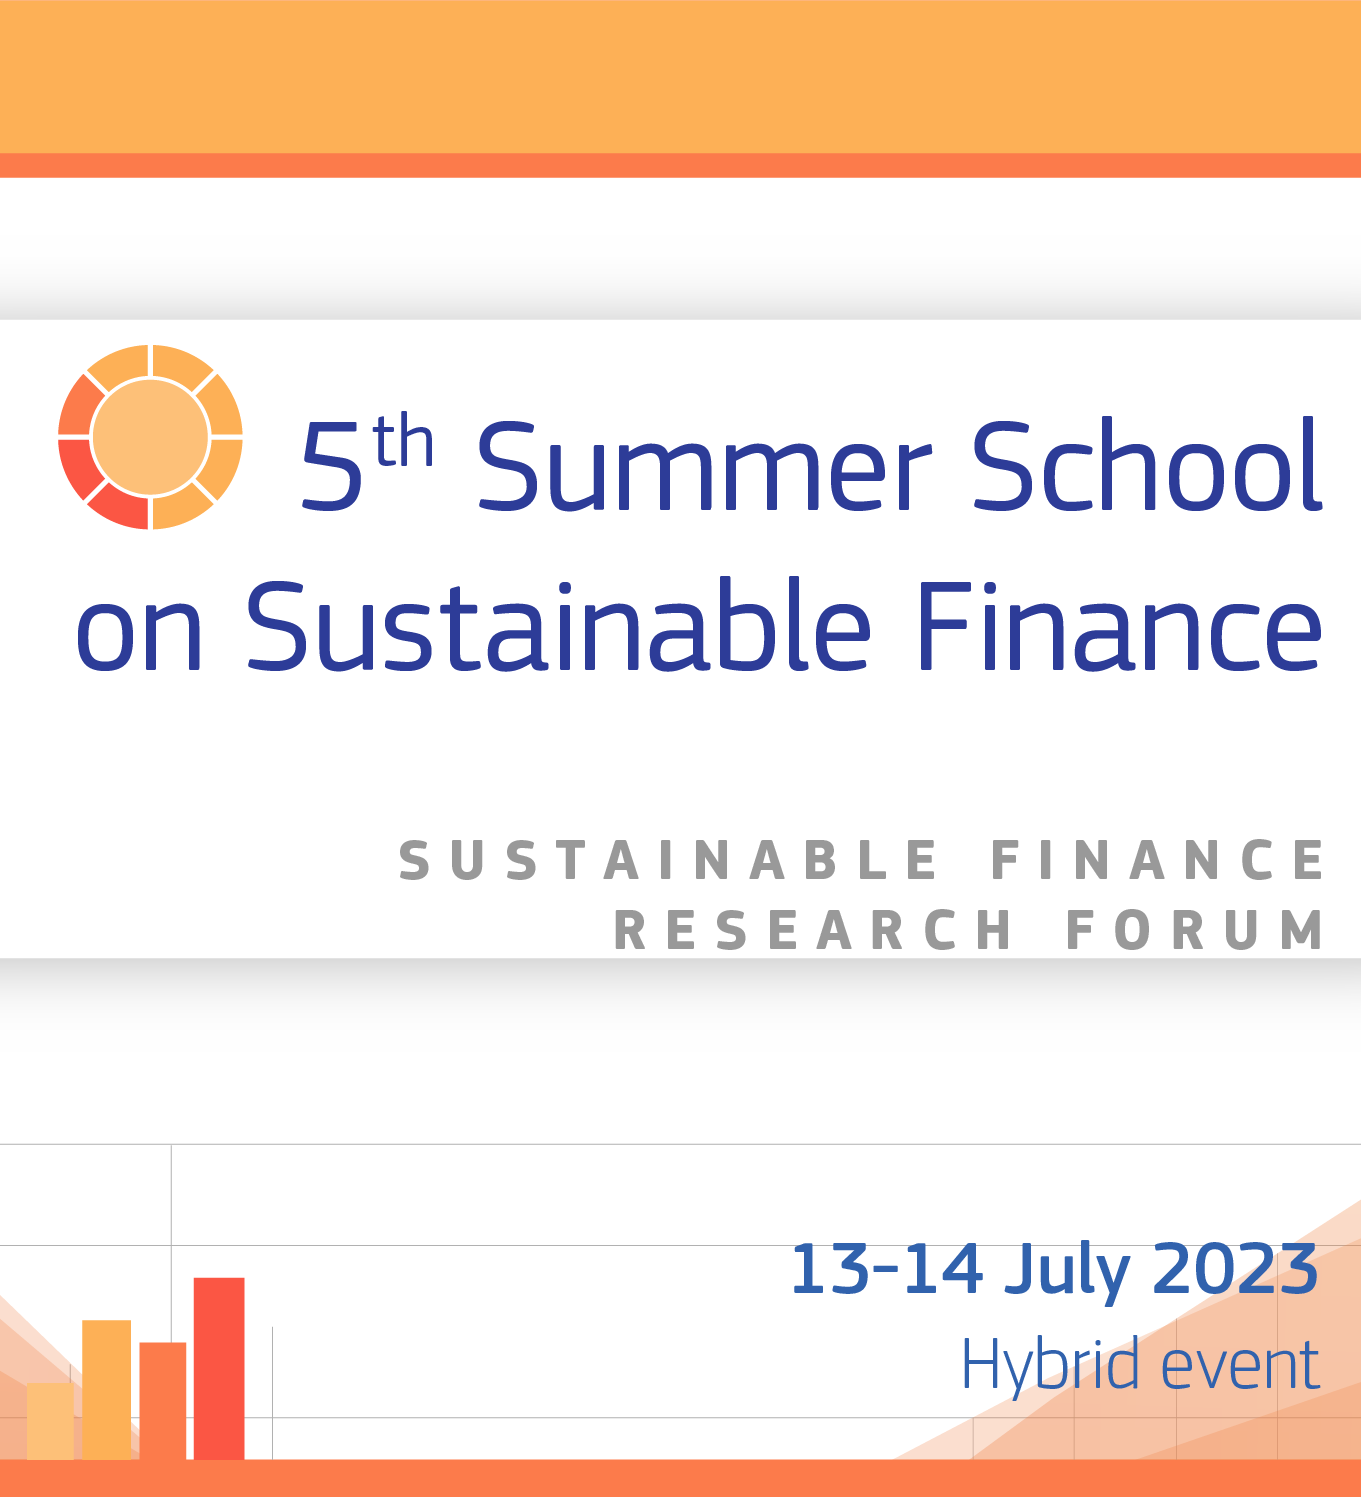 Image with text promoting the 5th Summer School on Sustainable Finance